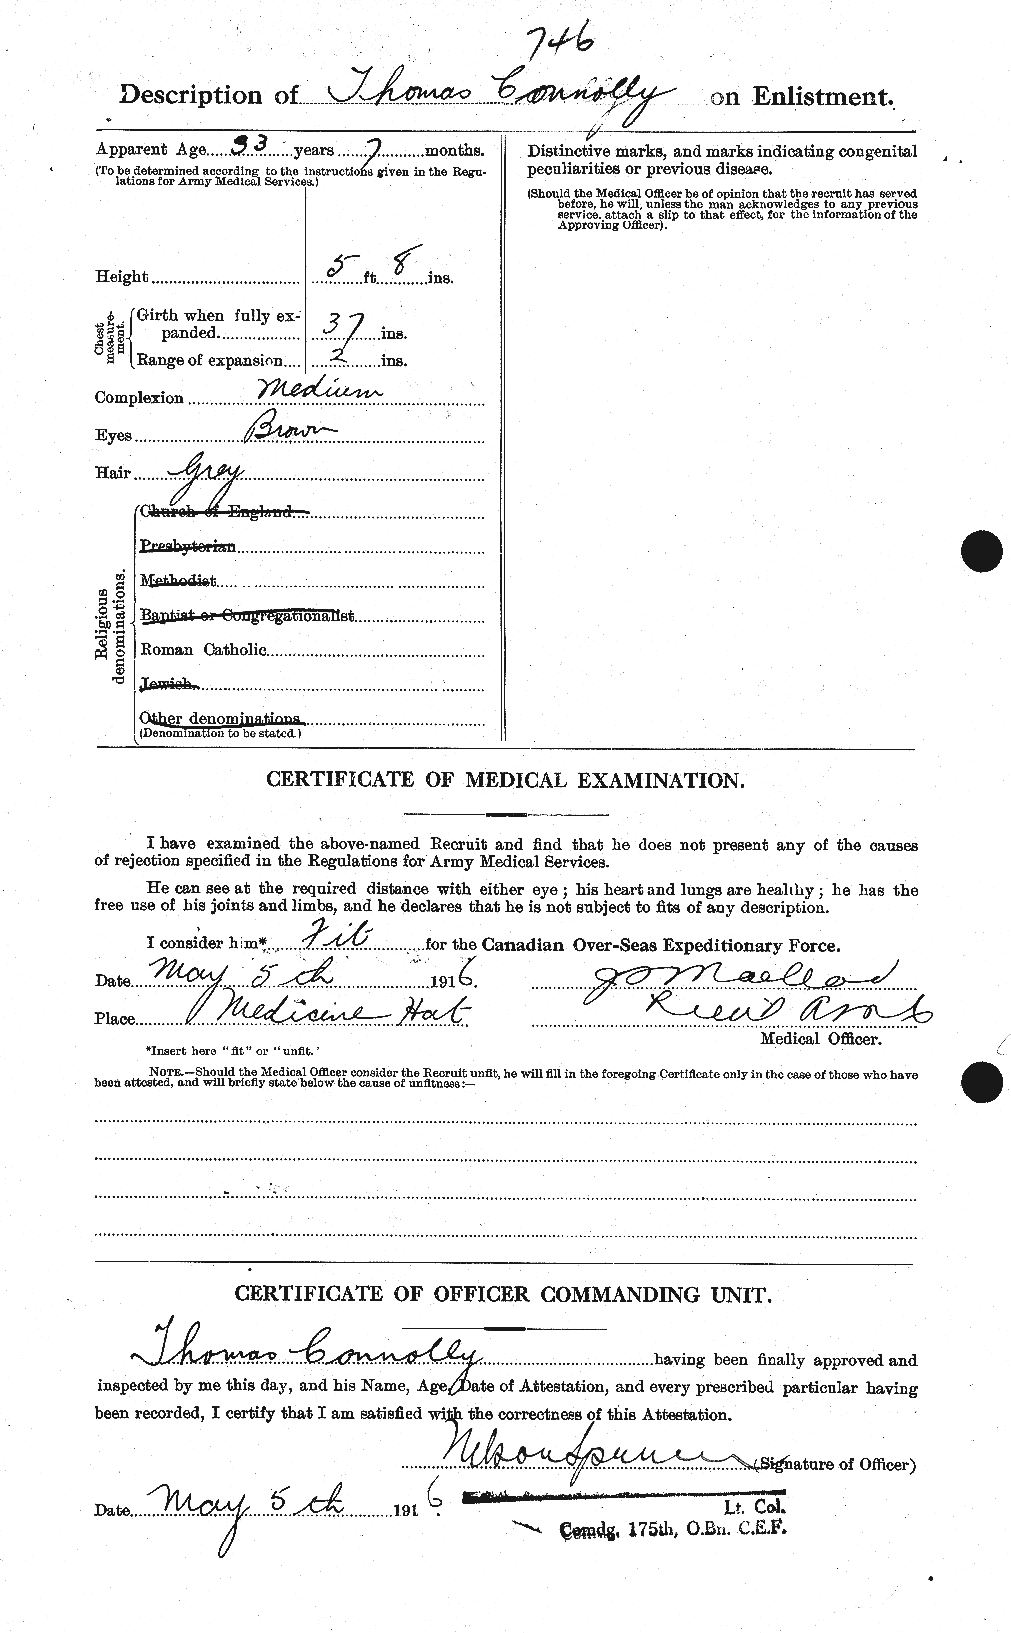 Personnel Records of the First World War - CEF 069041b